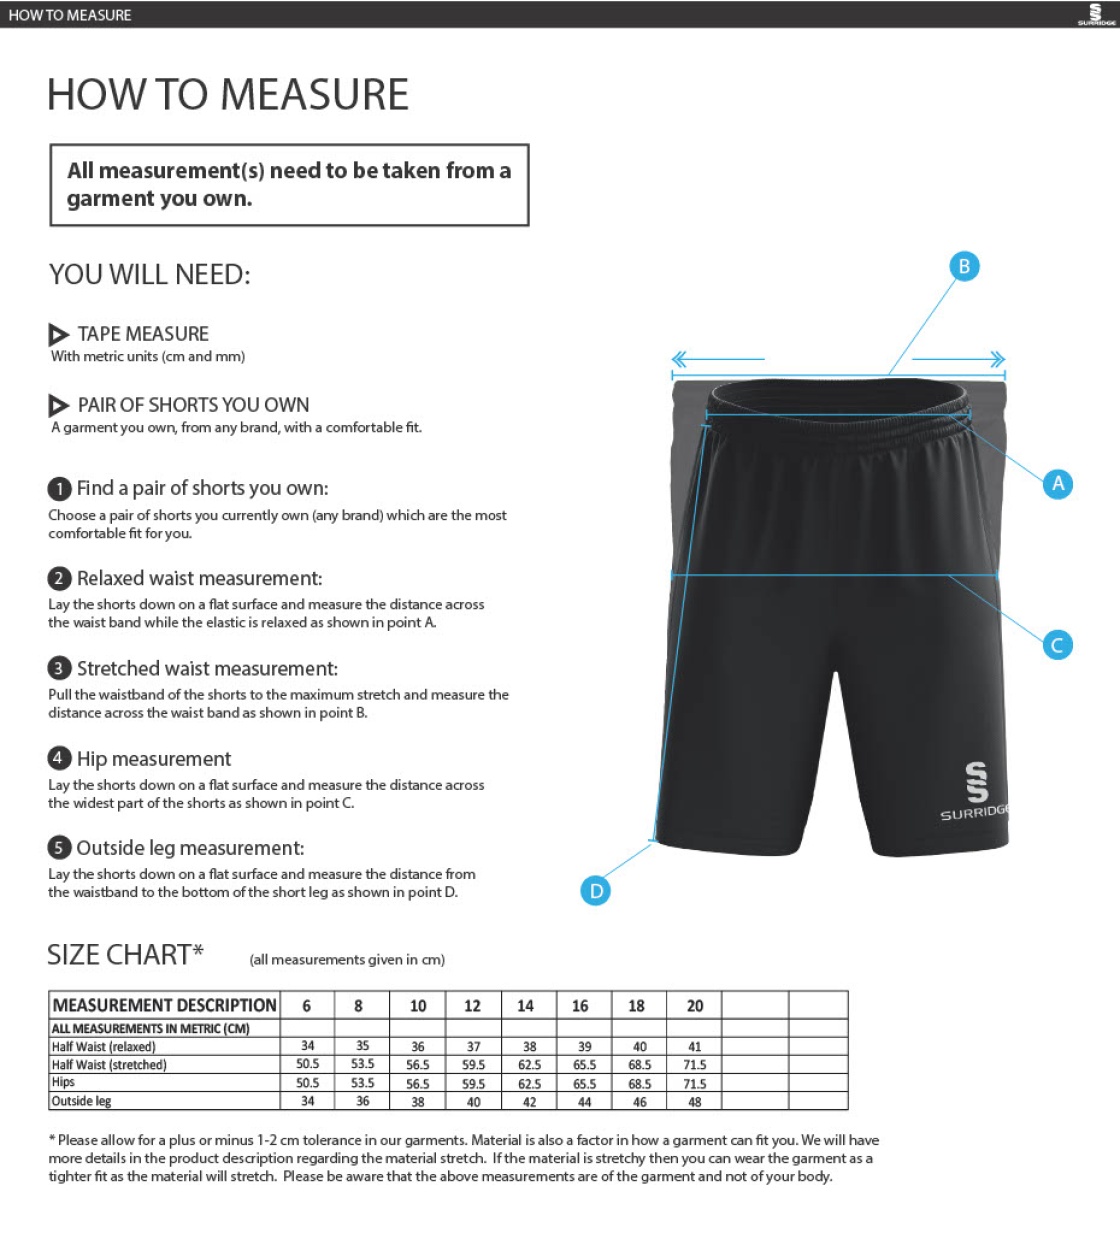 Gloucester Ladies Netball Ripstop Shorts - Size Guide